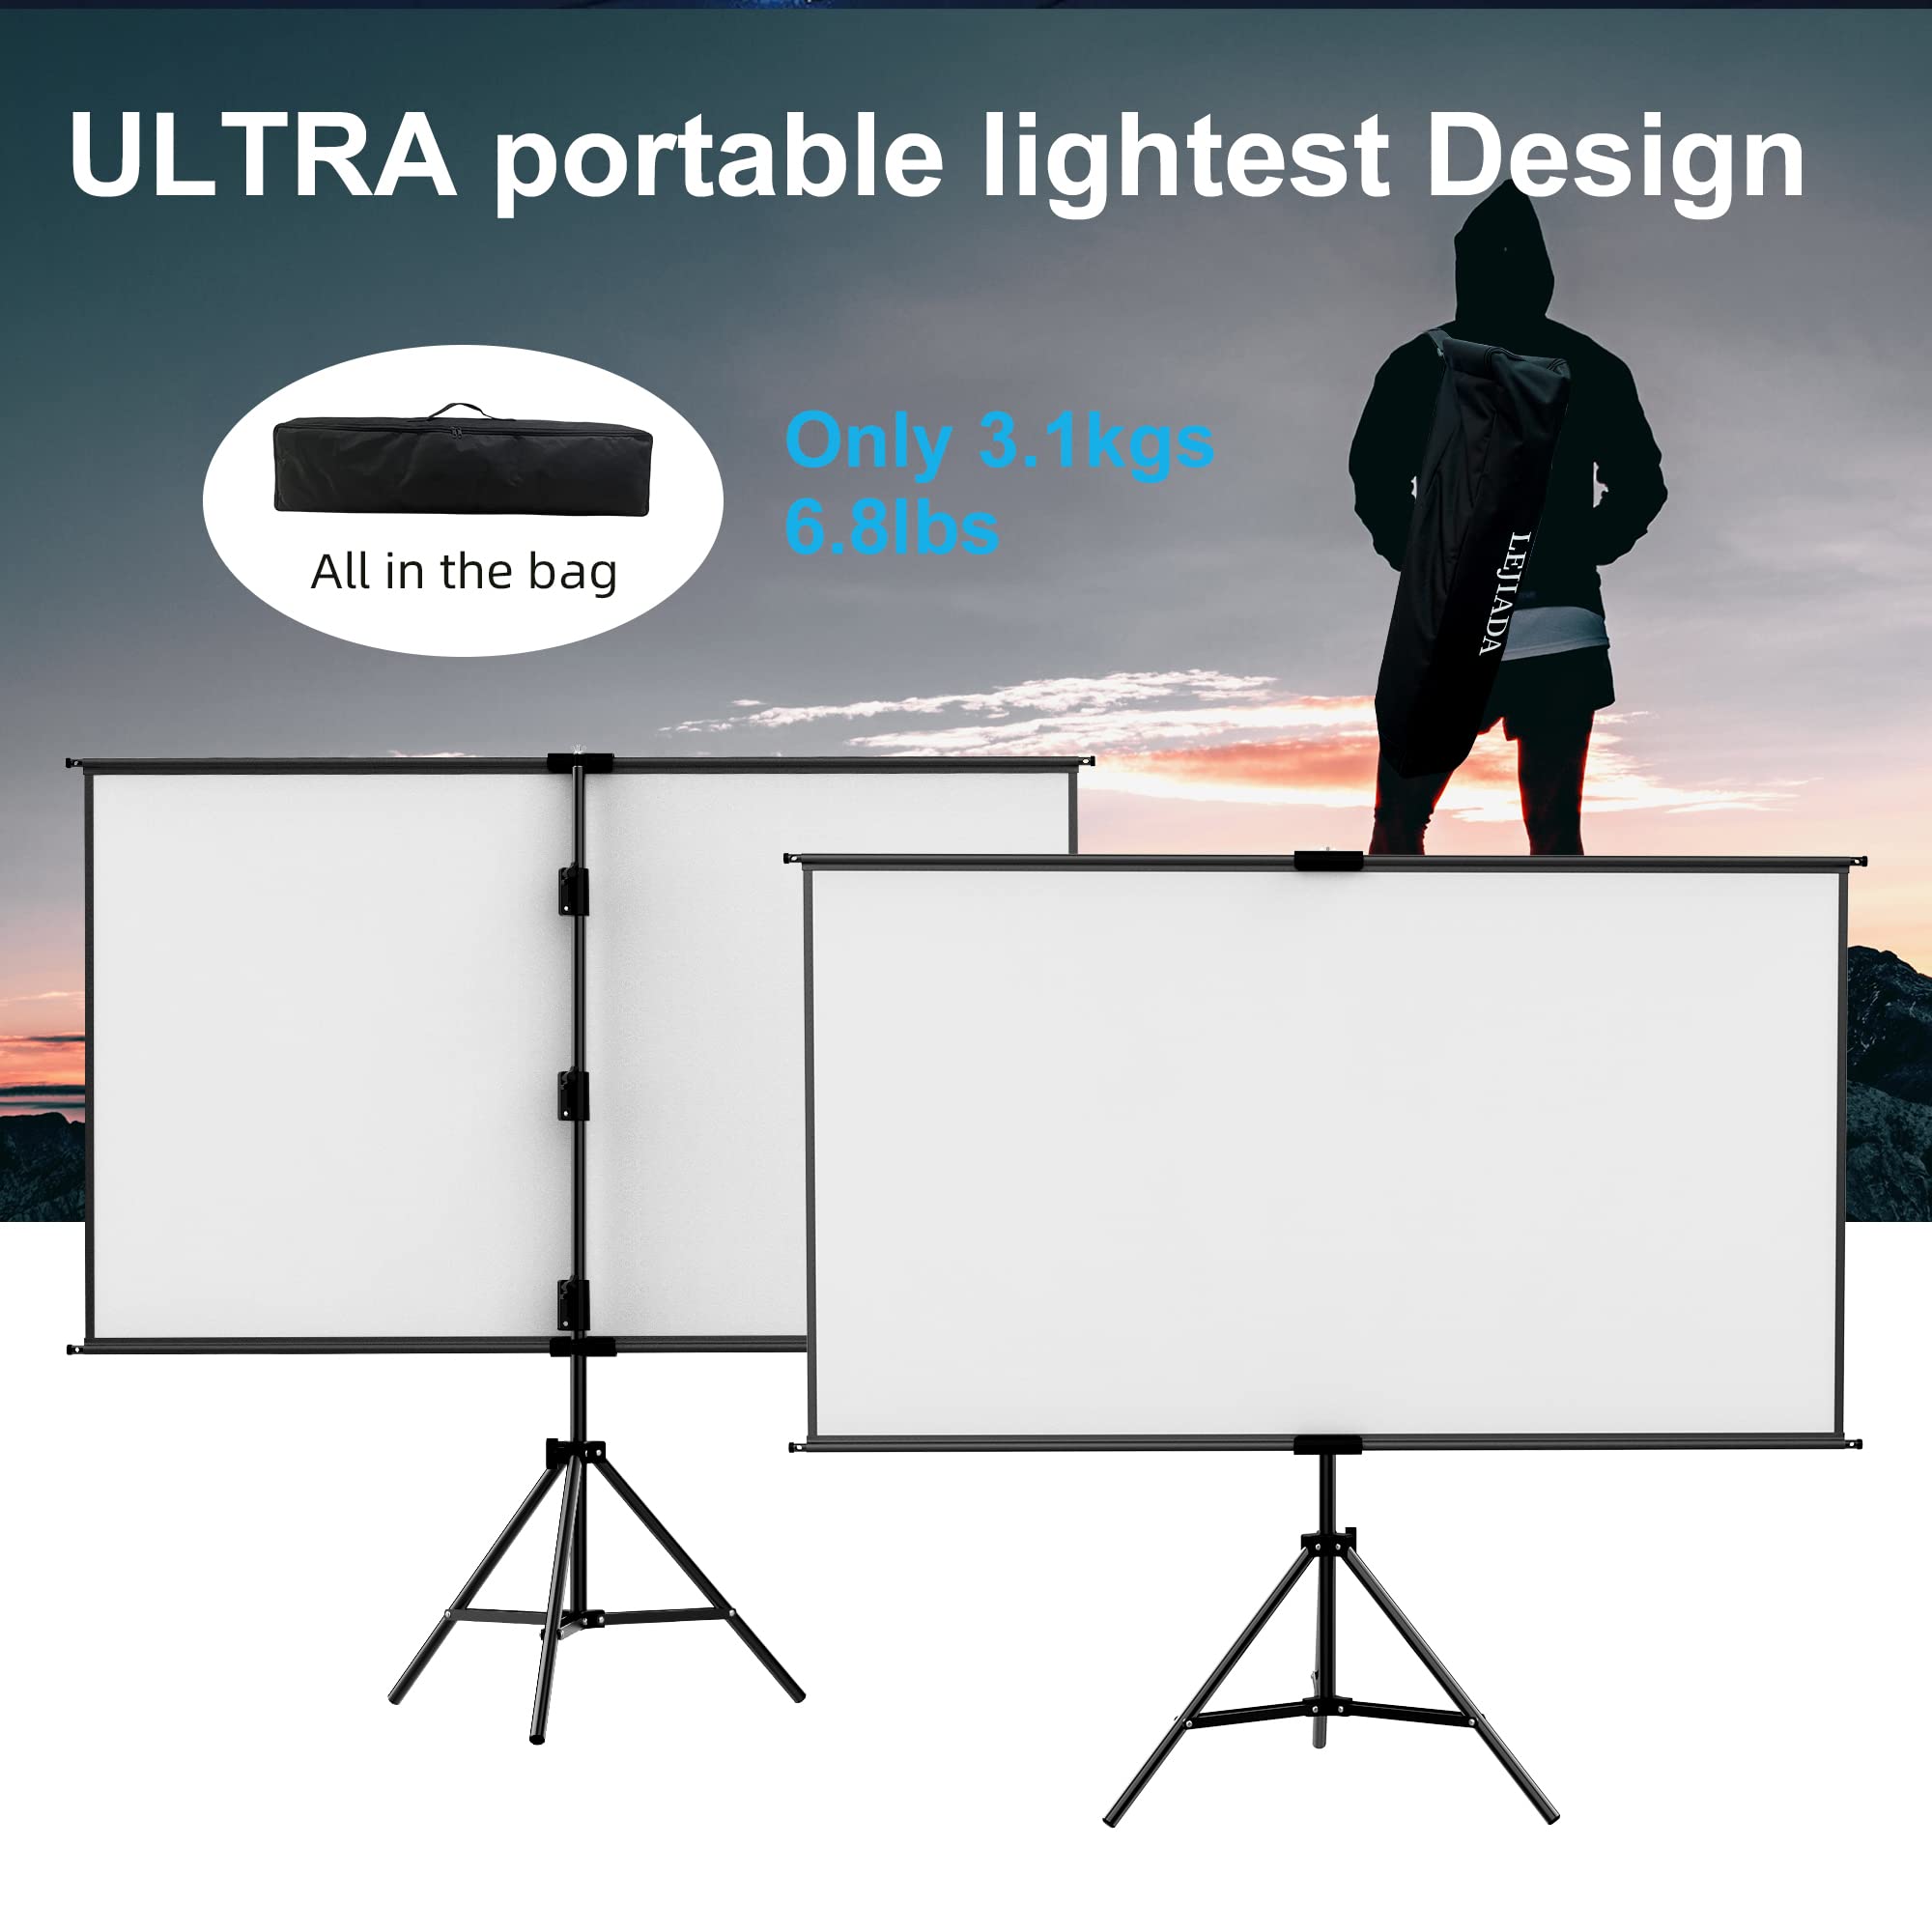 Small Portable Projector Screen Tripod Stand lejiada Mobile Projection Screen, Lightweight Carry & Durable Easy Adjustablle for Schools Meeting Conference Indoor Outdoor Use,